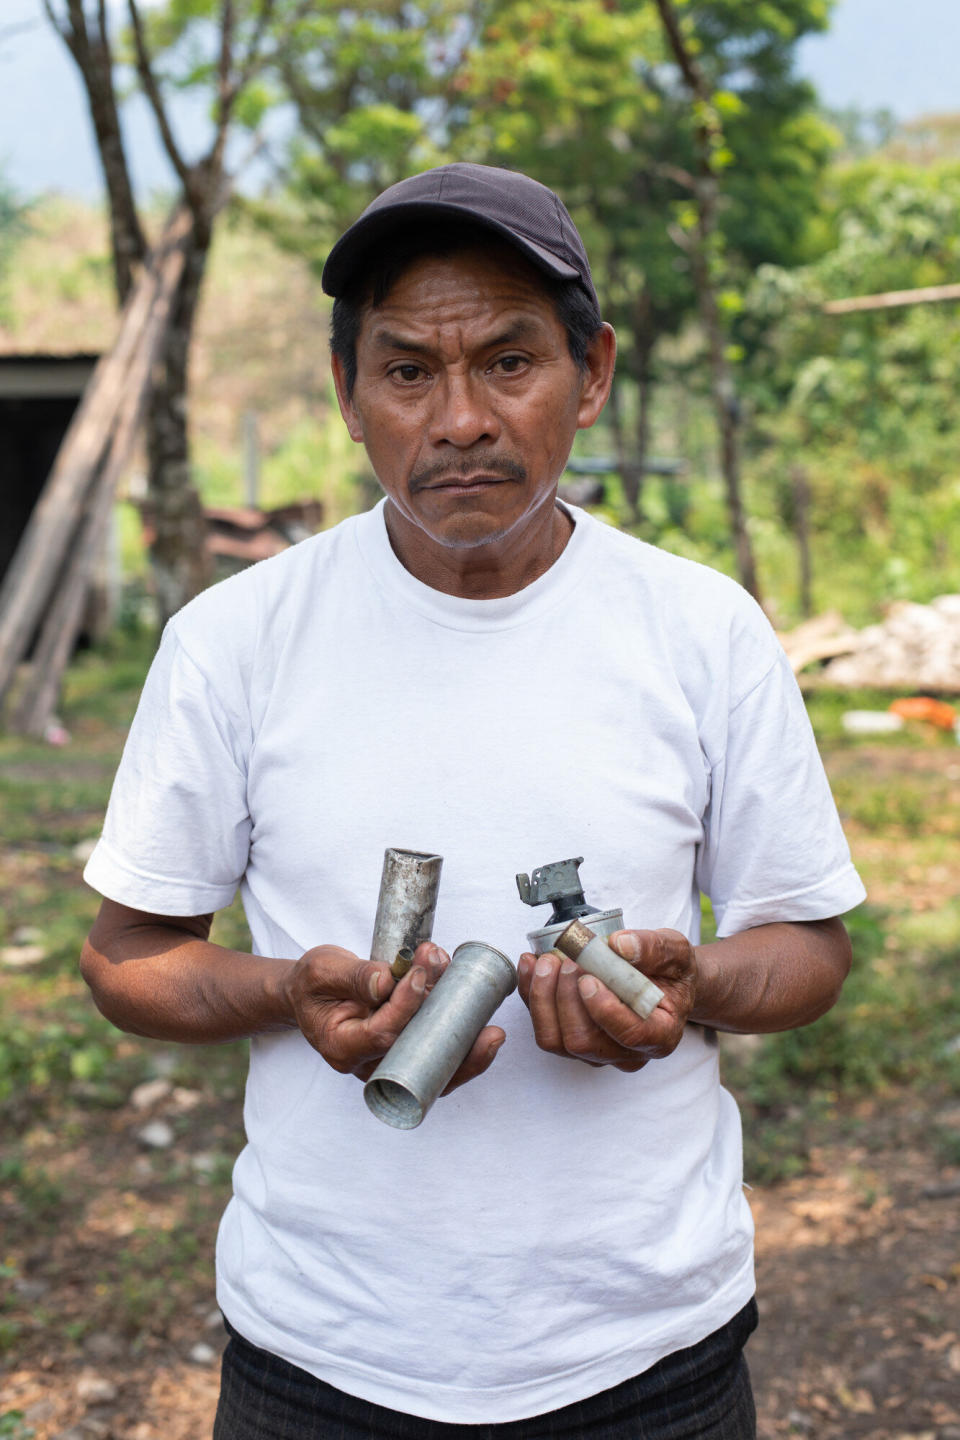 Joel Raymundo Domingo, 55, photographed in April, holds smoke bombs, tear gas canisters and other projectiles used by Guatemalan state forces to disperse a peaceful blockade&nbsp;against the San Mateo Hydroelectric Project, in October 2018.&nbsp; (Photo: Global Witness / James Rodriguez)